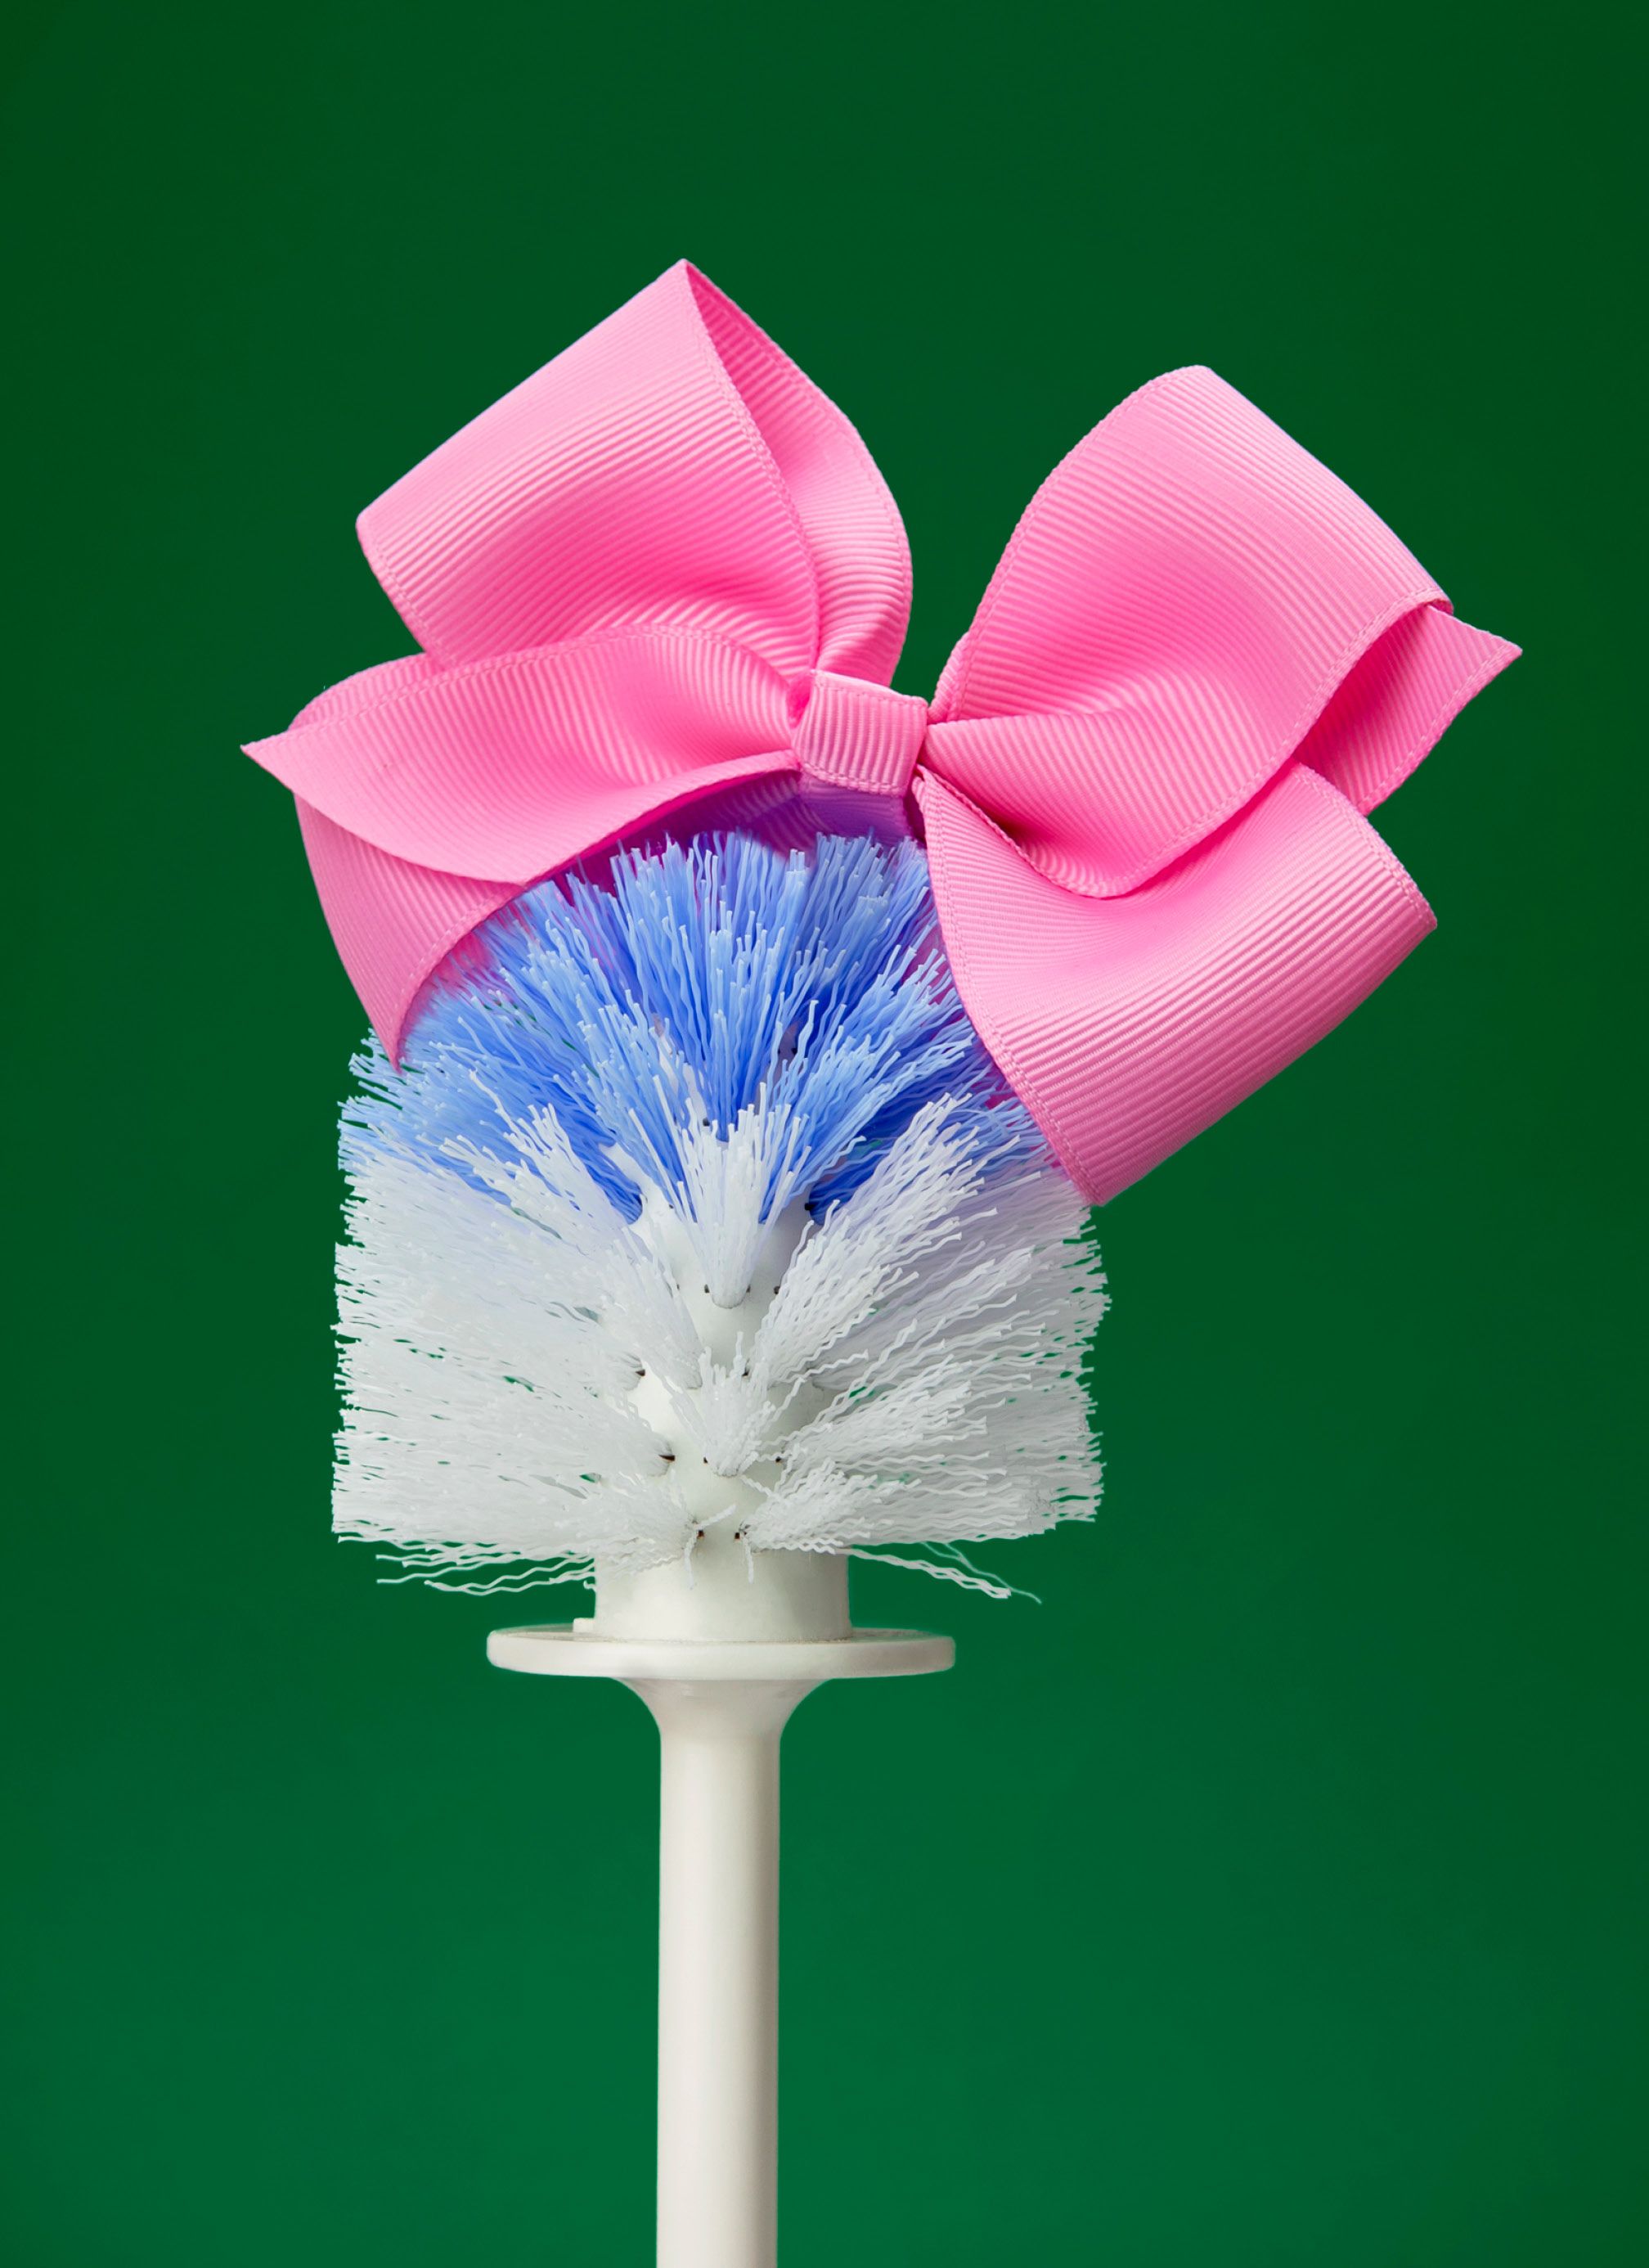 A toilet brush wearing a pink bow.